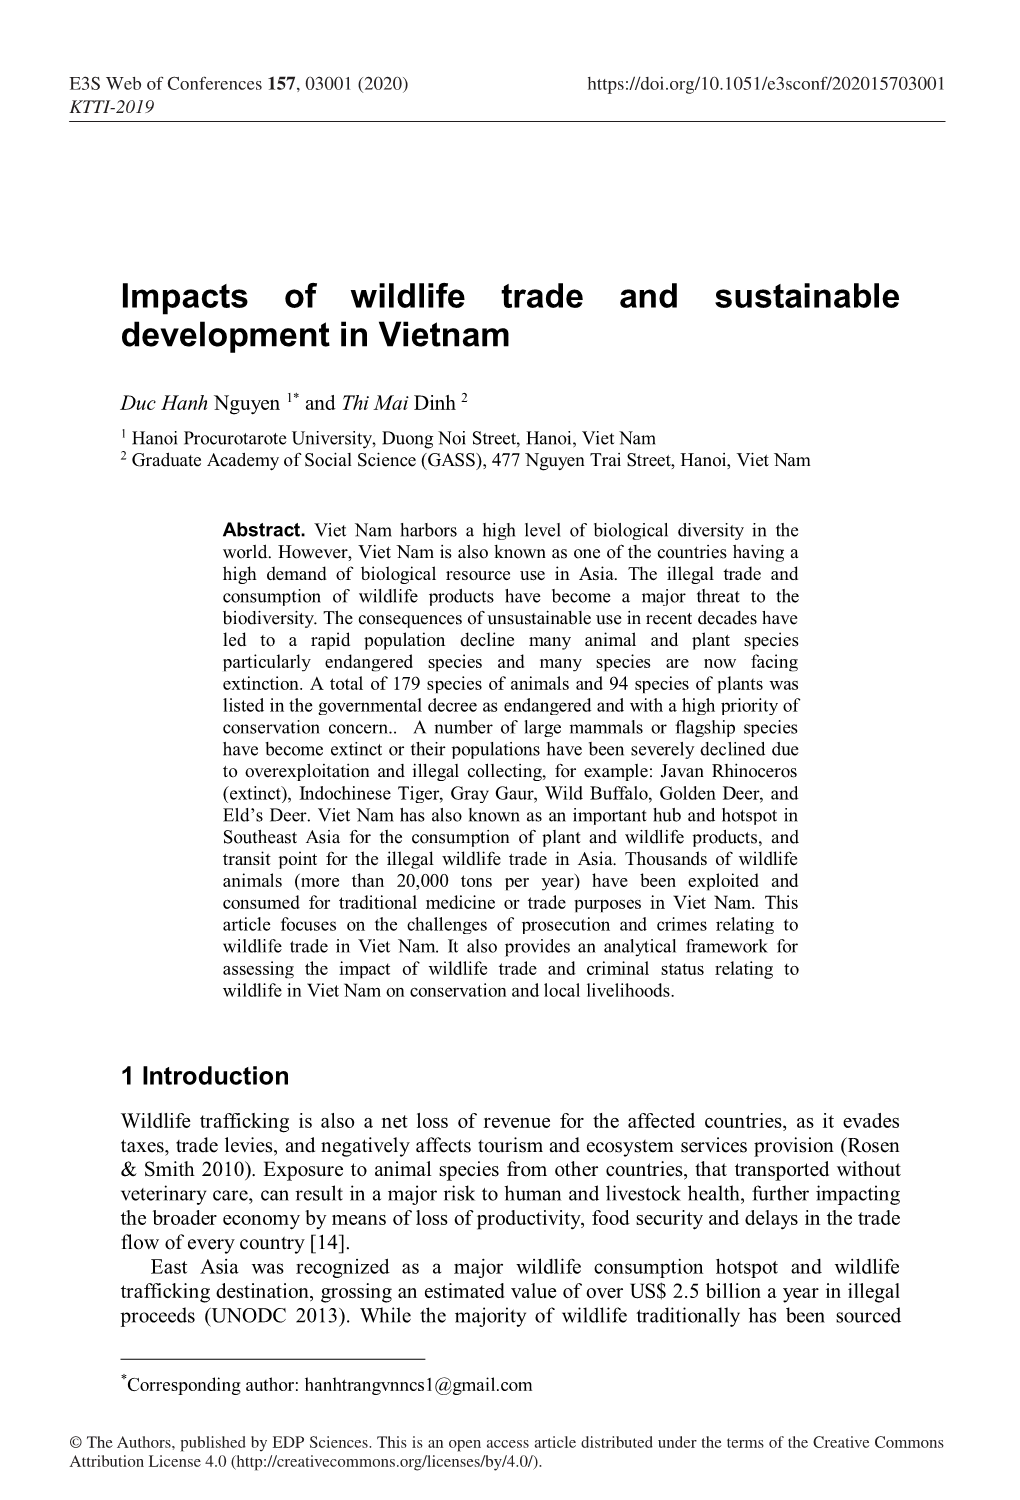 Impacts of Wildlife Trade and Sustainable Development in Vietnam